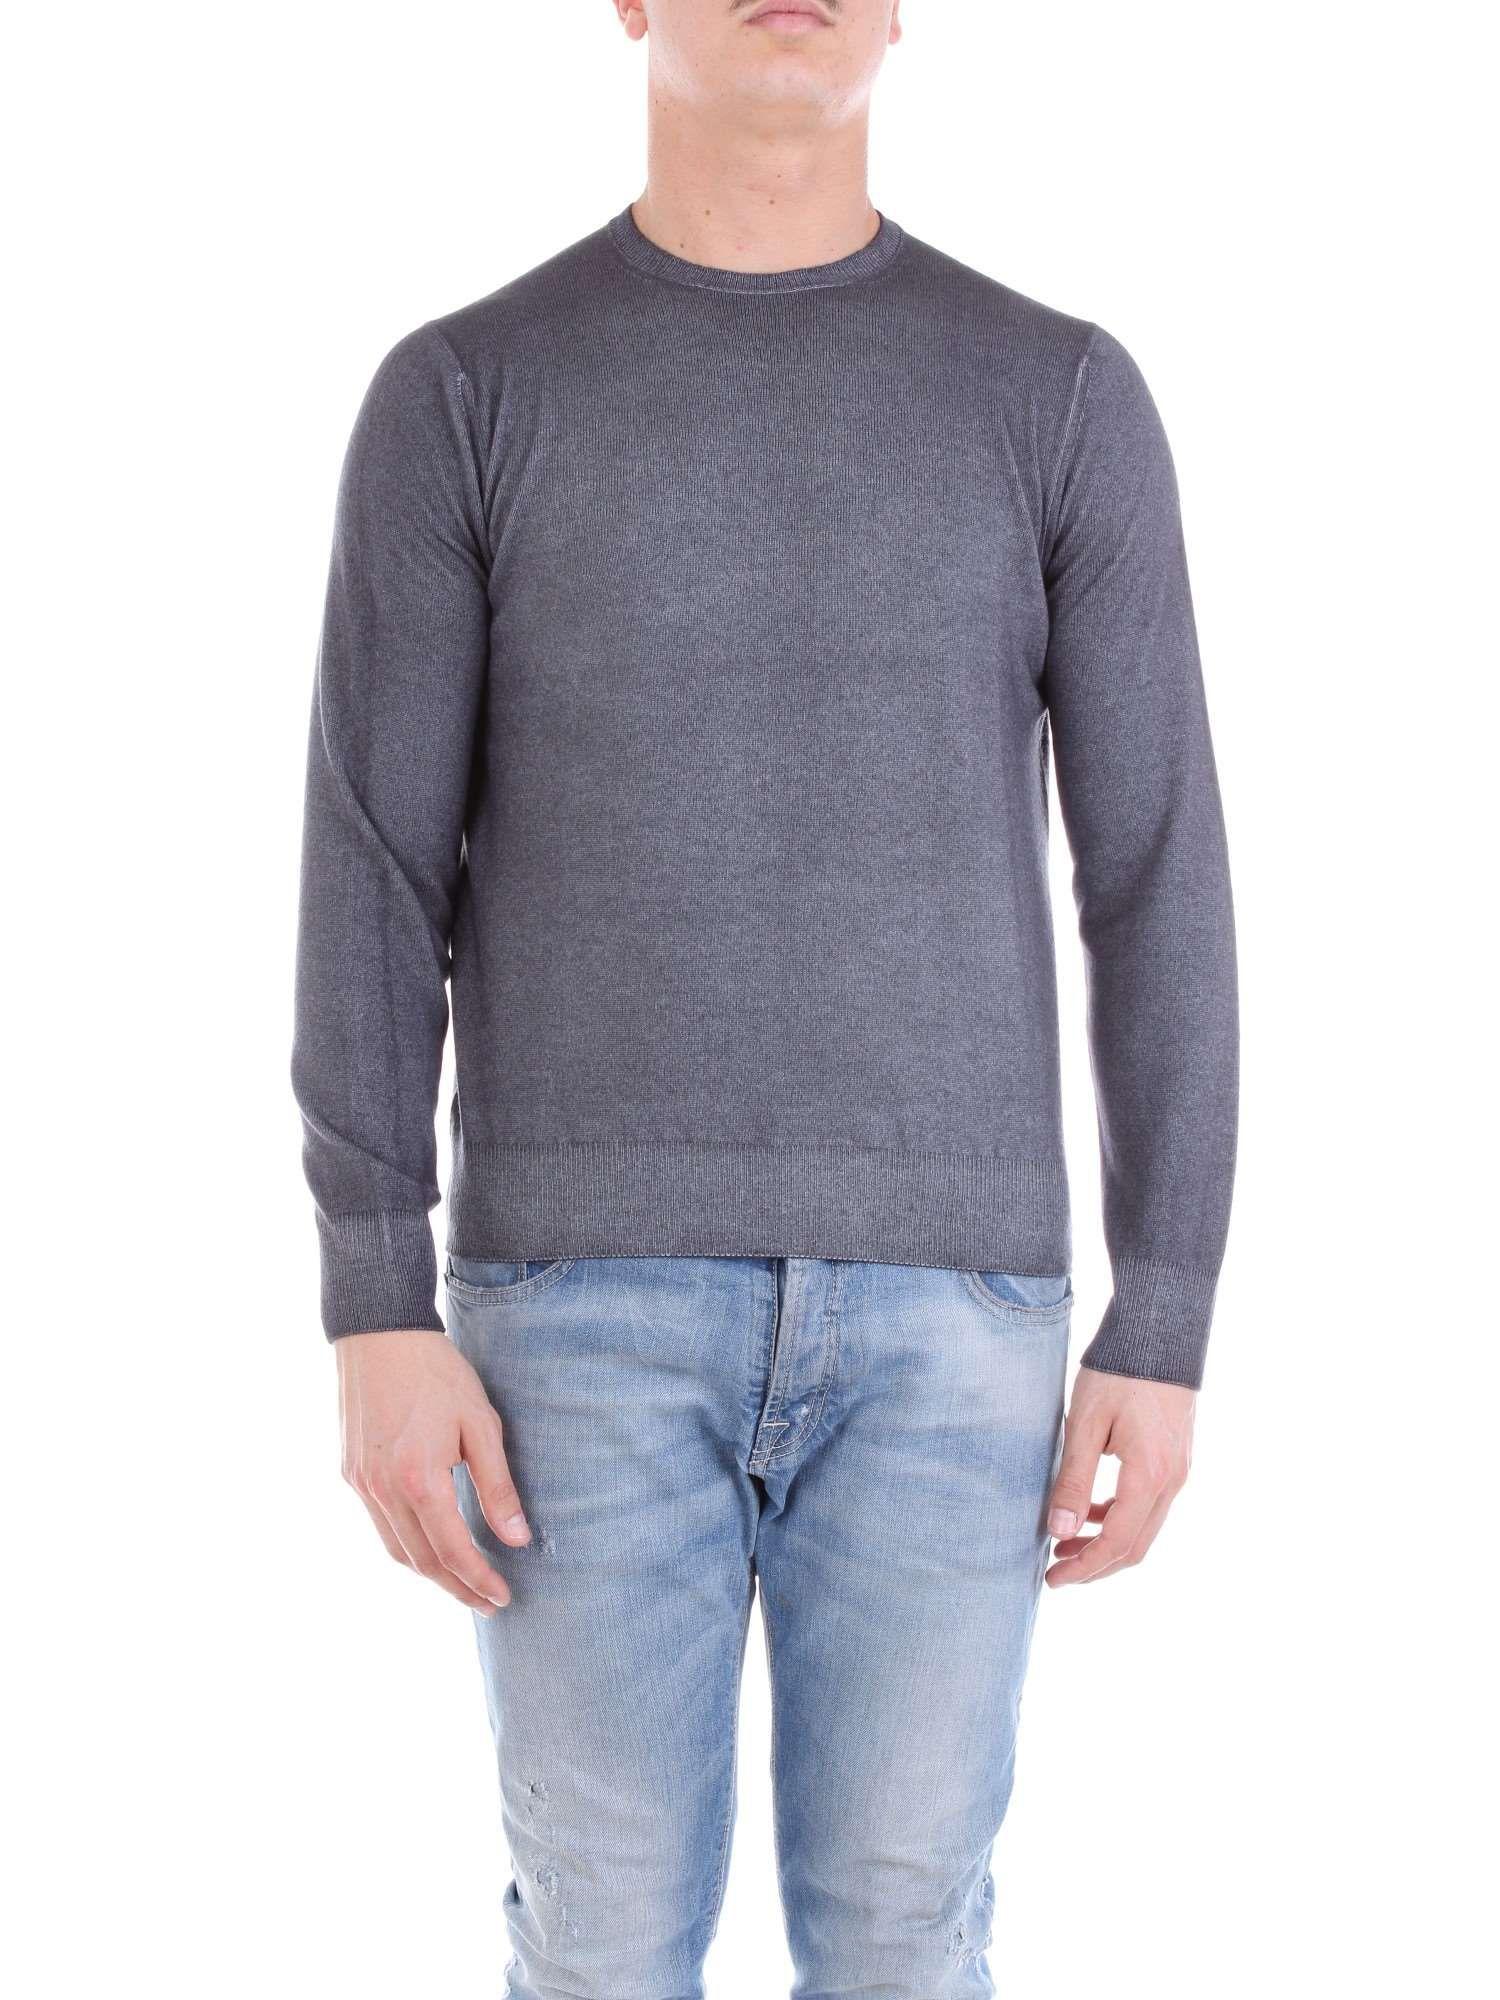 Cruciani Grey Cashmere Sweater in Gray for Men - Lyst